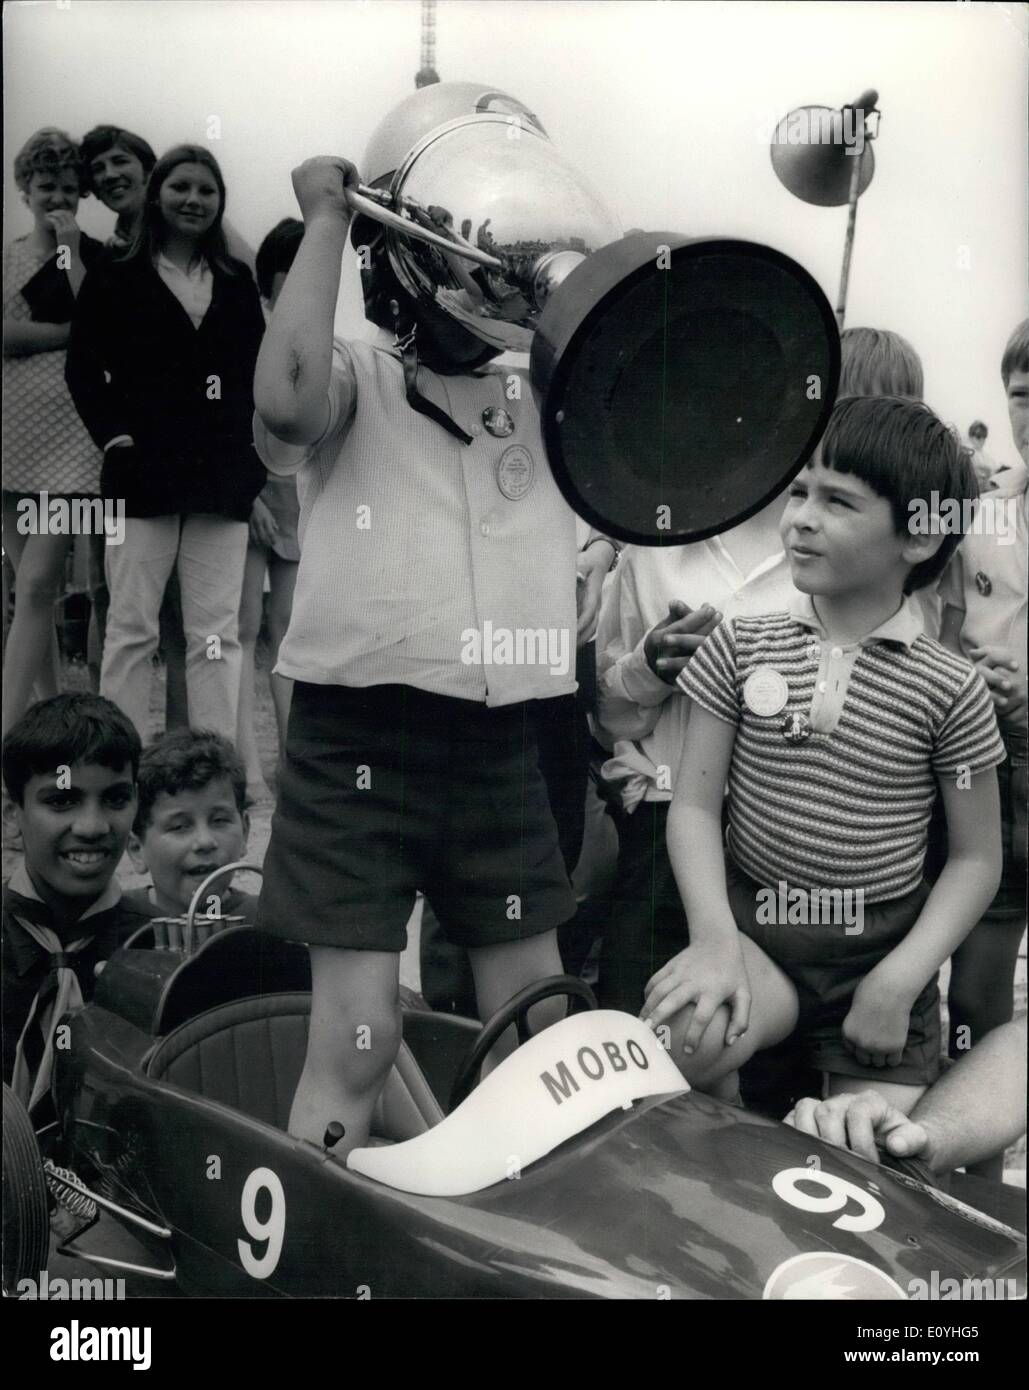 Jun. 06, 1970 - The Rac ''Junior Grand Prix'' at Crystal Palace: Britain's young aspiring drives took part today in the Rac ''Junior Grand Prix'' at Crystal Palace . the competitor, boys and girls aged 6 and under were at the controls, of ''Pedal powered'' mini racing cars as they made a 75 yard dash down a section of the motor racing circuit normally used by the more experienced racing driver. the winner's prize was the car he drove to victory Stock Photo